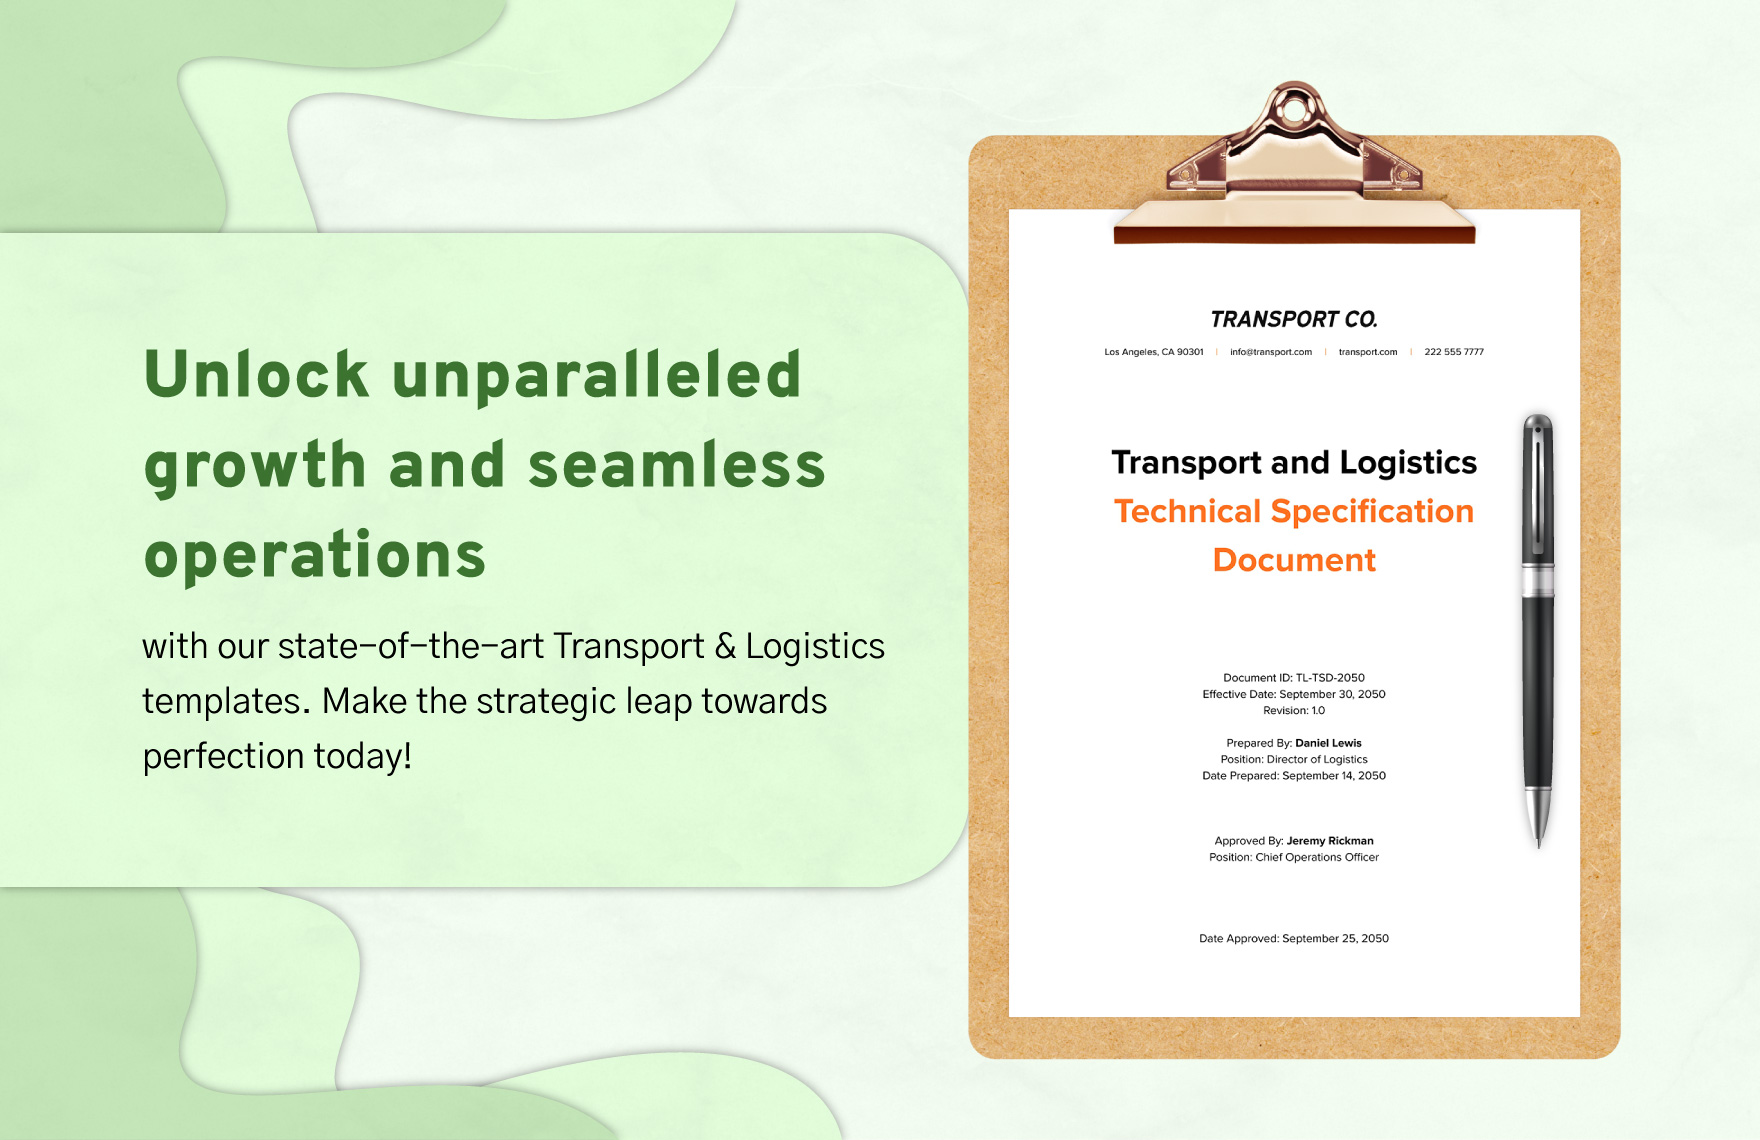 Transport and Logistics Technical Specification Document Template